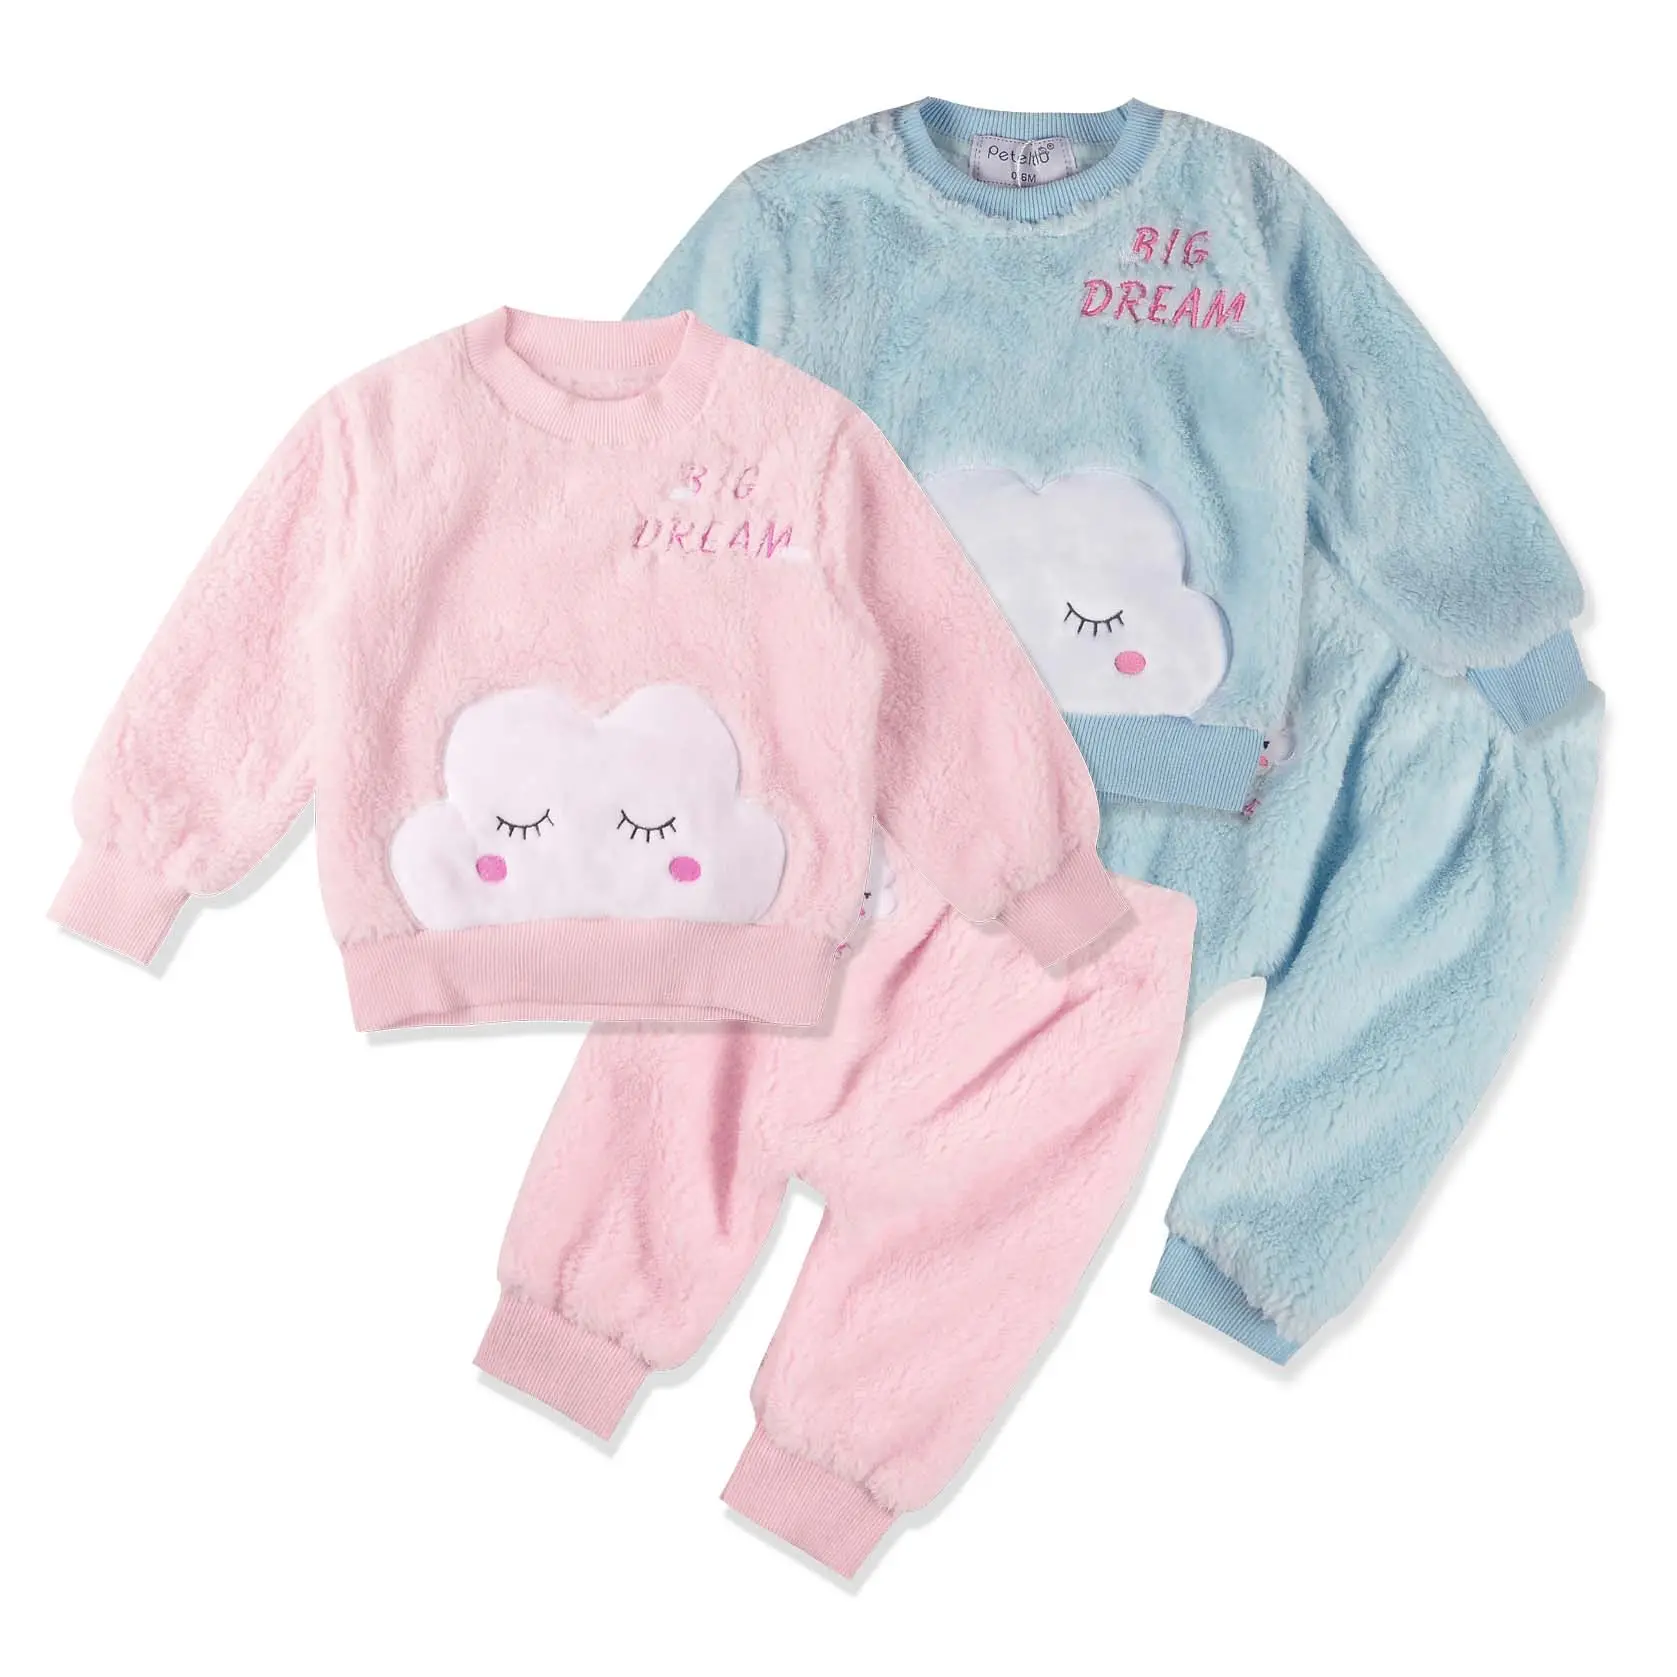 Wholesale Winter Fall Baby Clothing Sets Kids Clothes Soft Boutique Children Clothing Cloud Pattern Sets Baby 0-36 Months